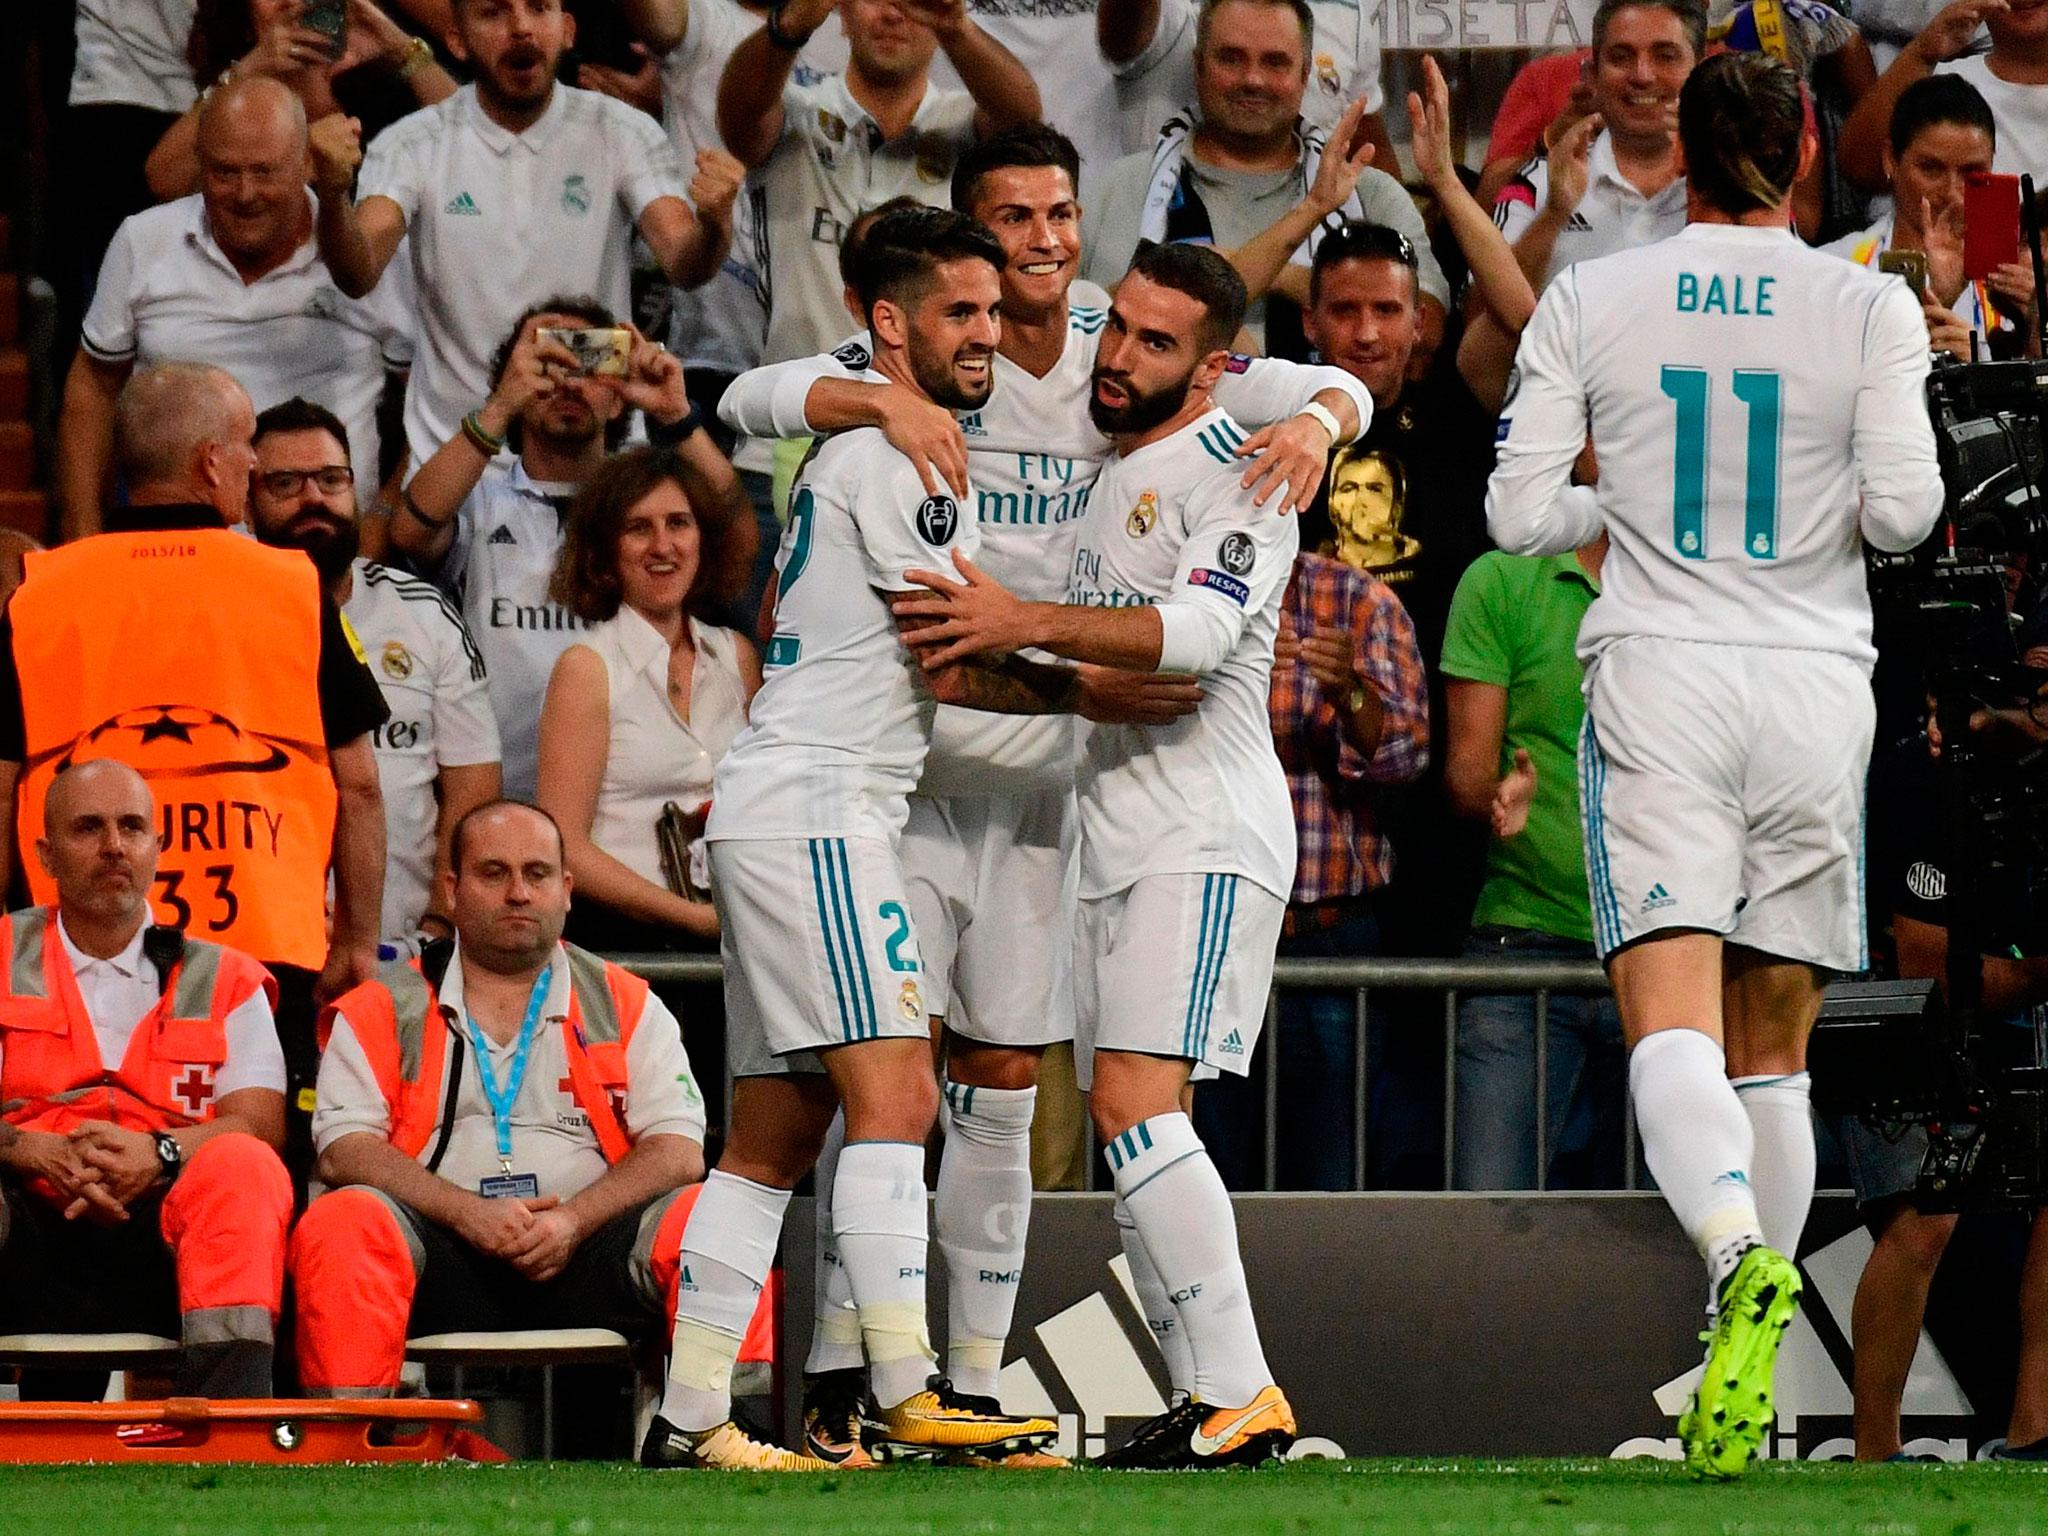 Cristiano Ronaldo scored a double as Real Madrid got their title defence underway